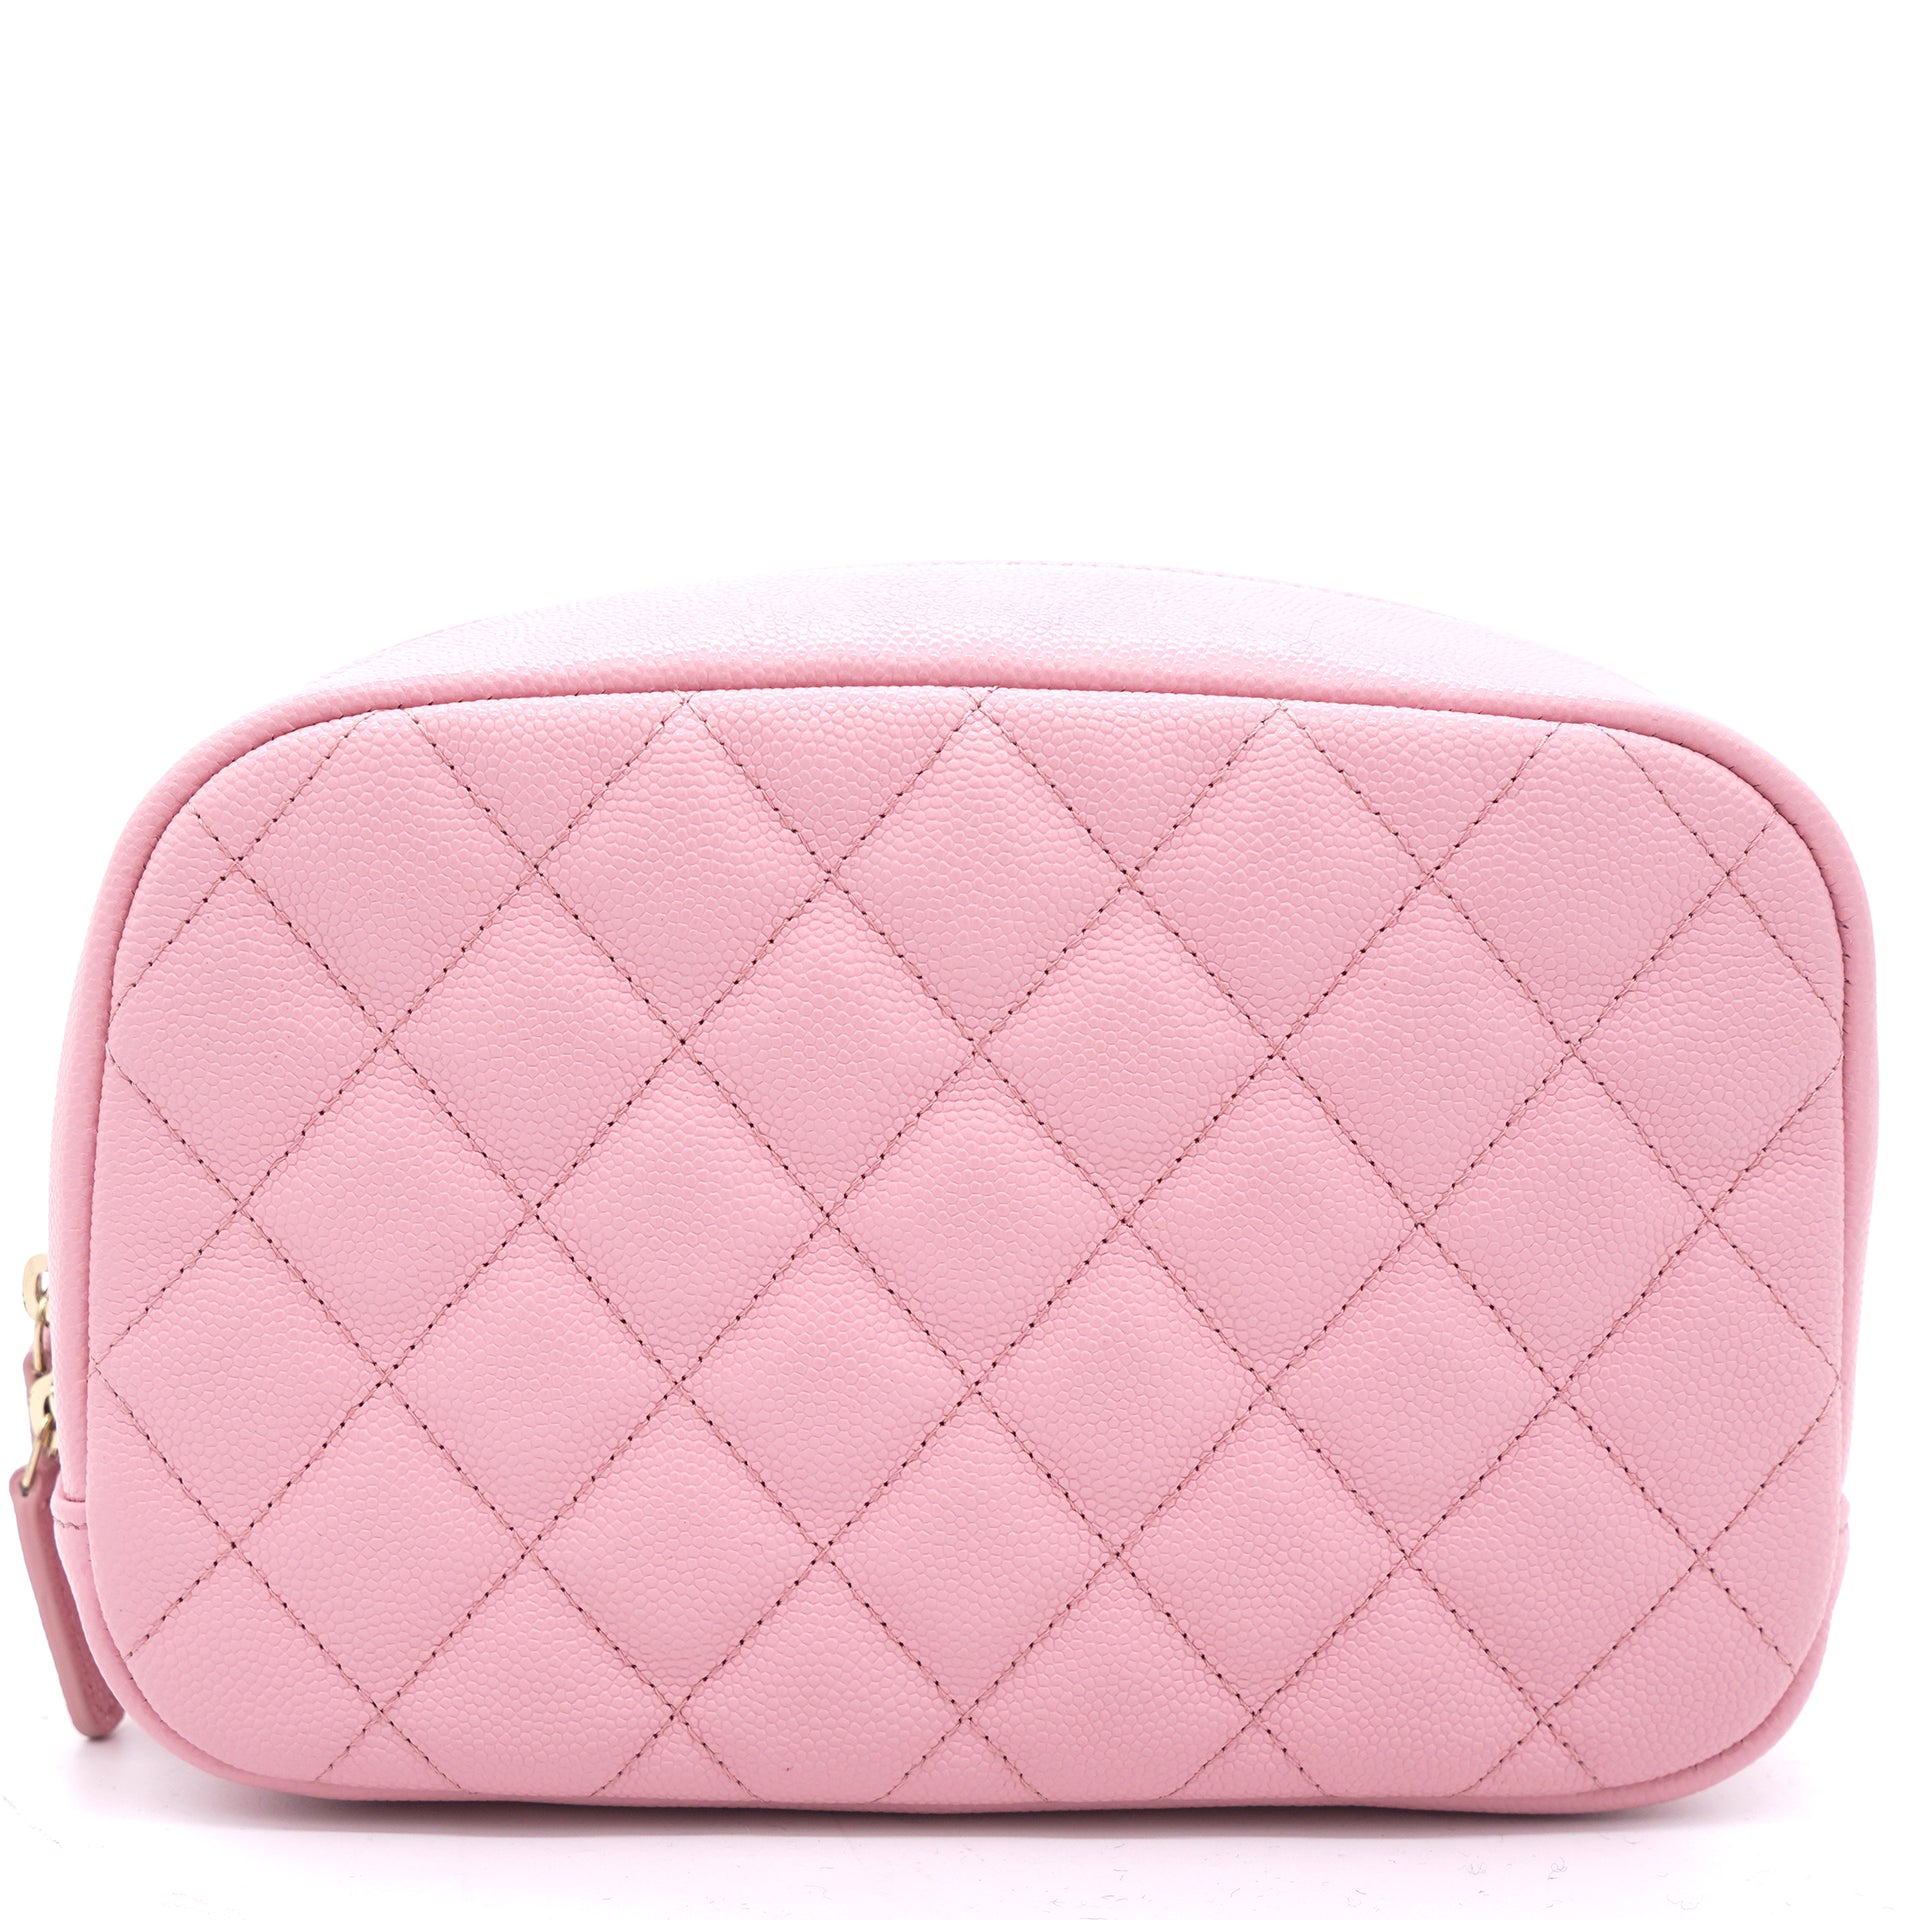 Chanel Caviar Quilted Medium Curvy Pouch Cosmetic Case Light Pink